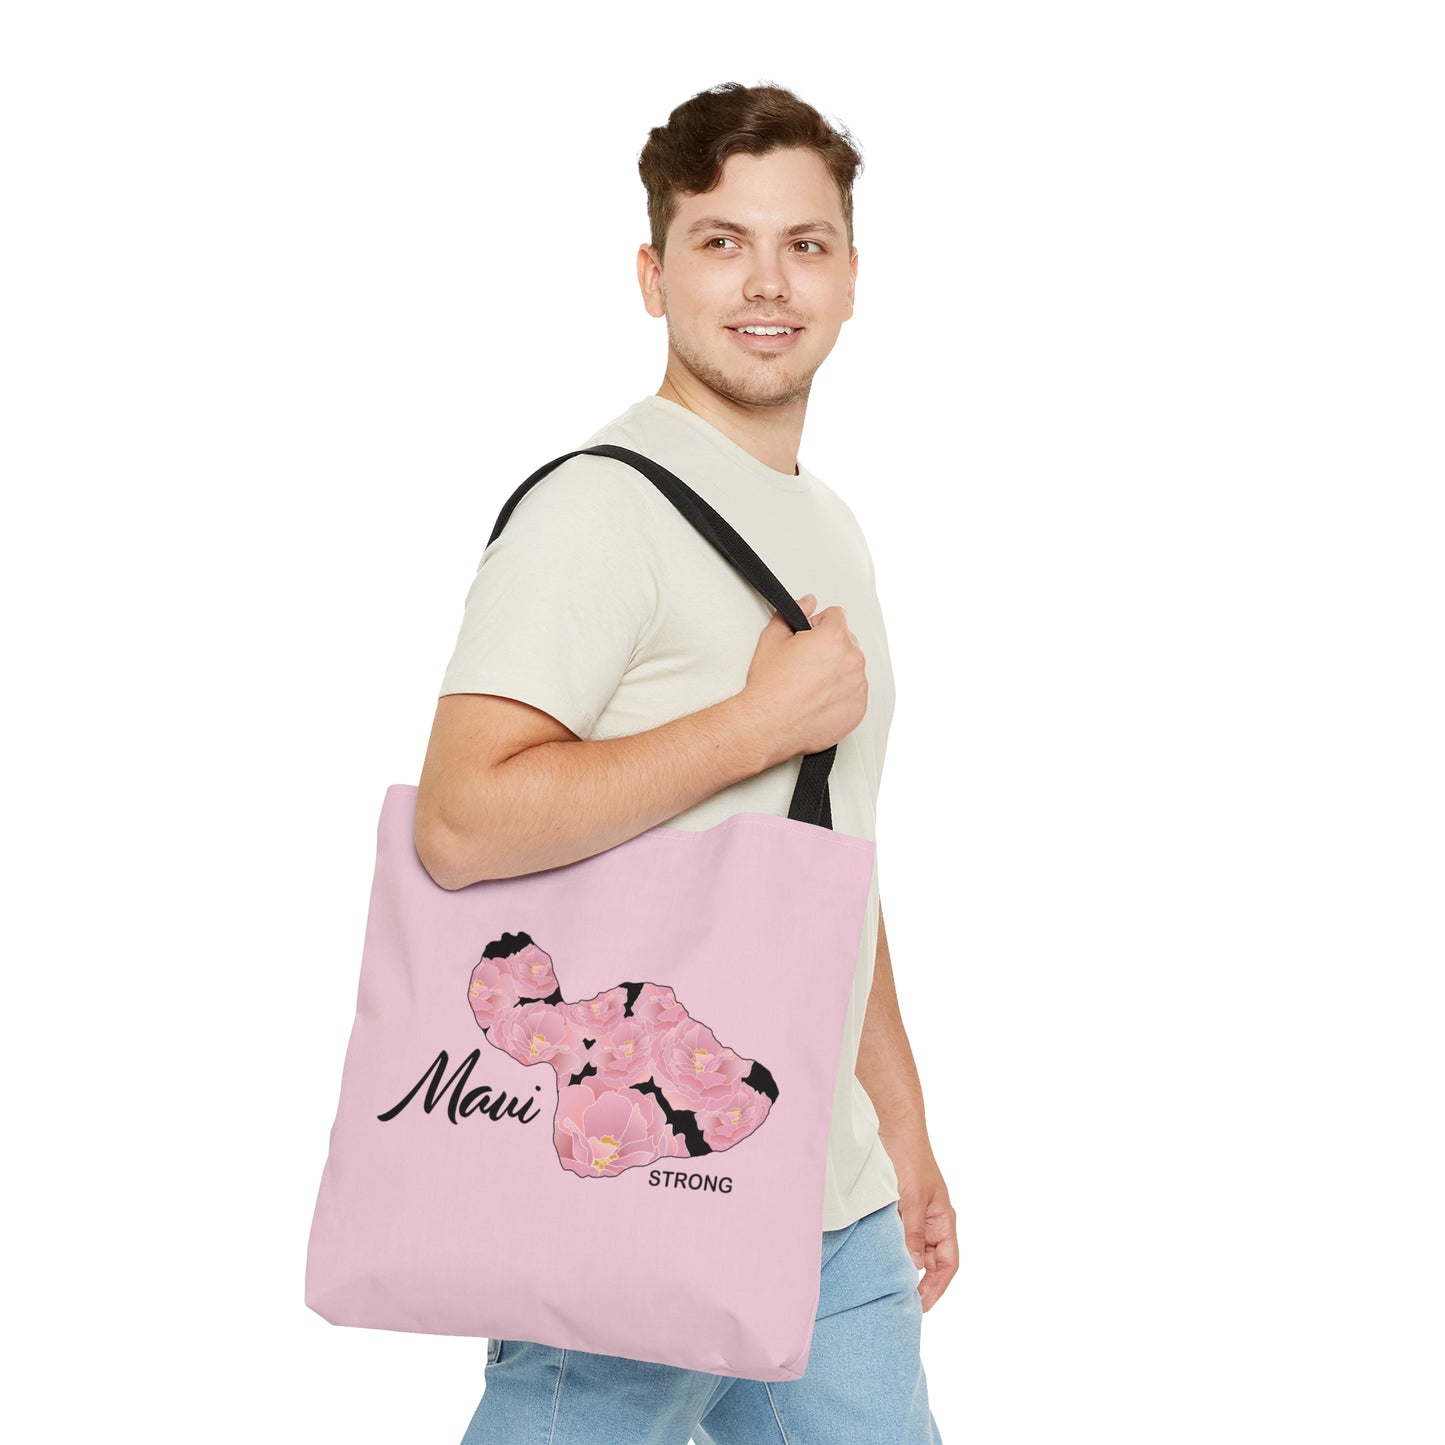 Tote bag- Maui Strong Lokelani Island Pink and Black, Proceeds Donated for Lahaina Wildfire Relief